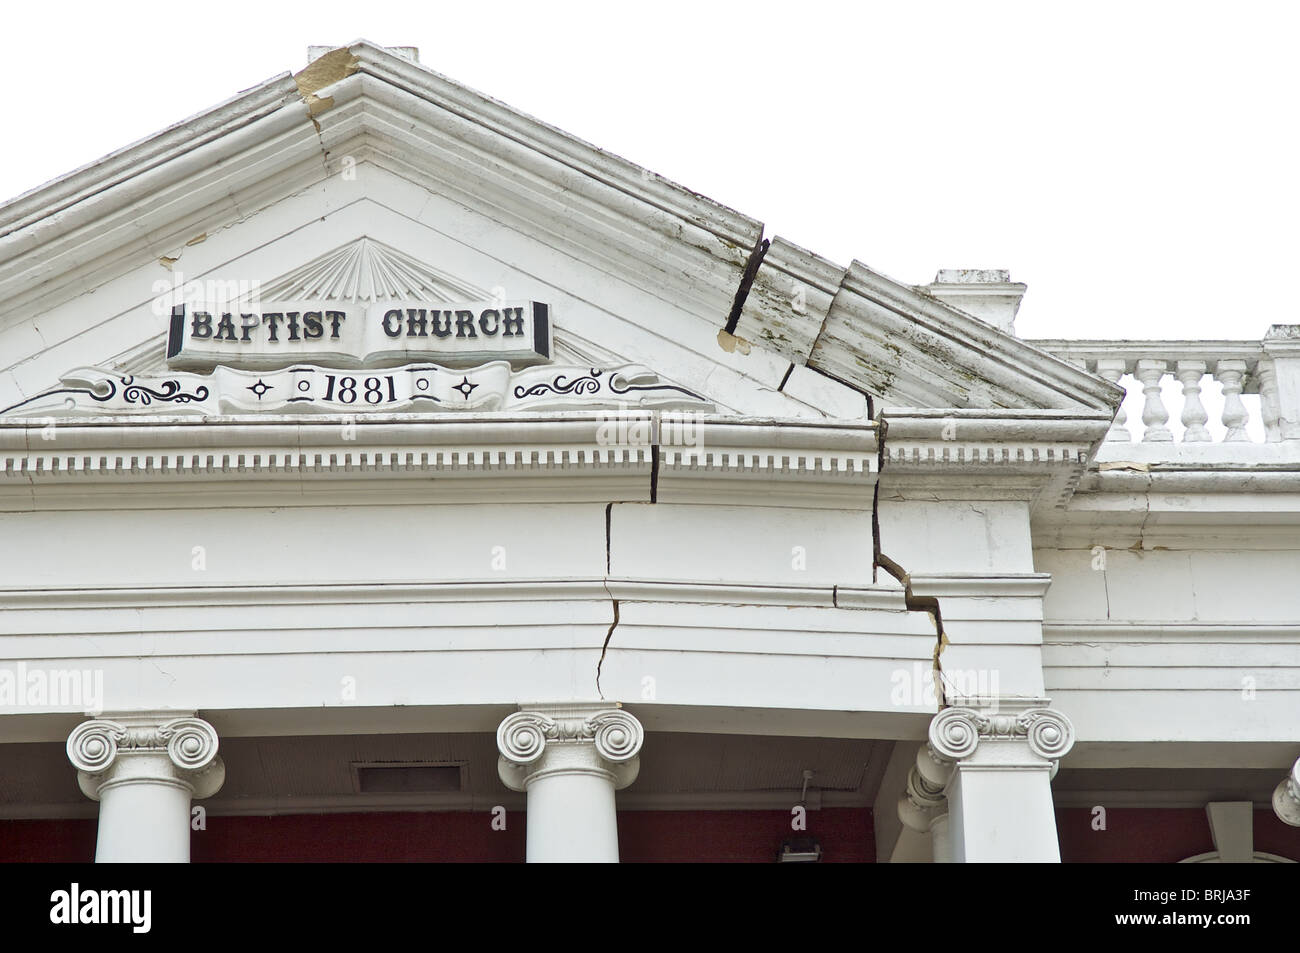 Damage caused by magnitude 7.1 earthquake, Christchurch, New Zealand,  4th September, 2010. Stock Photo